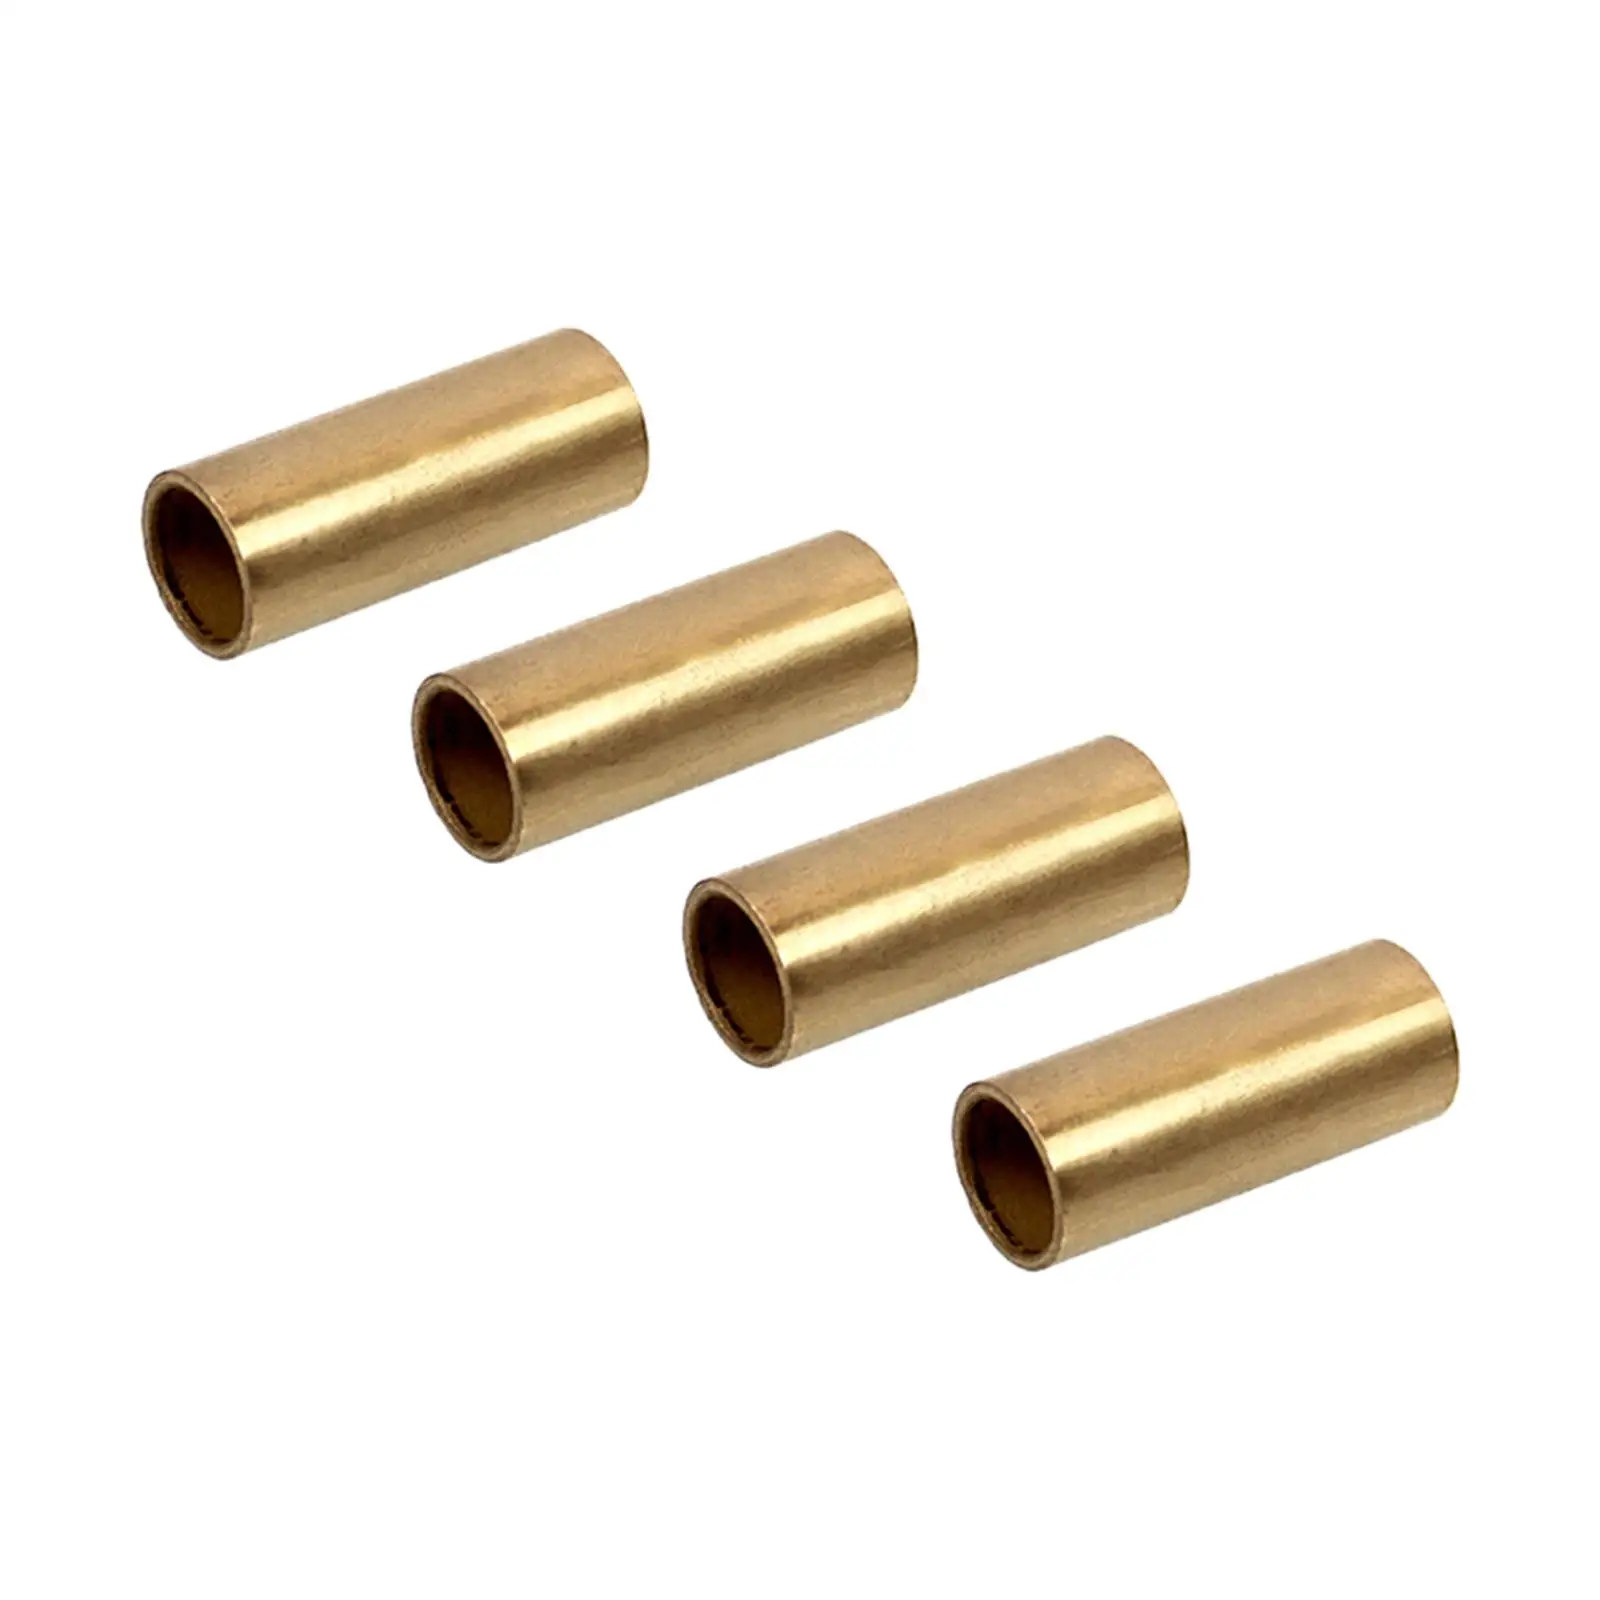 4x Bronze Leaf Spring Bushing Kit K7129100 Accessories Durable Parts Direct Replaces